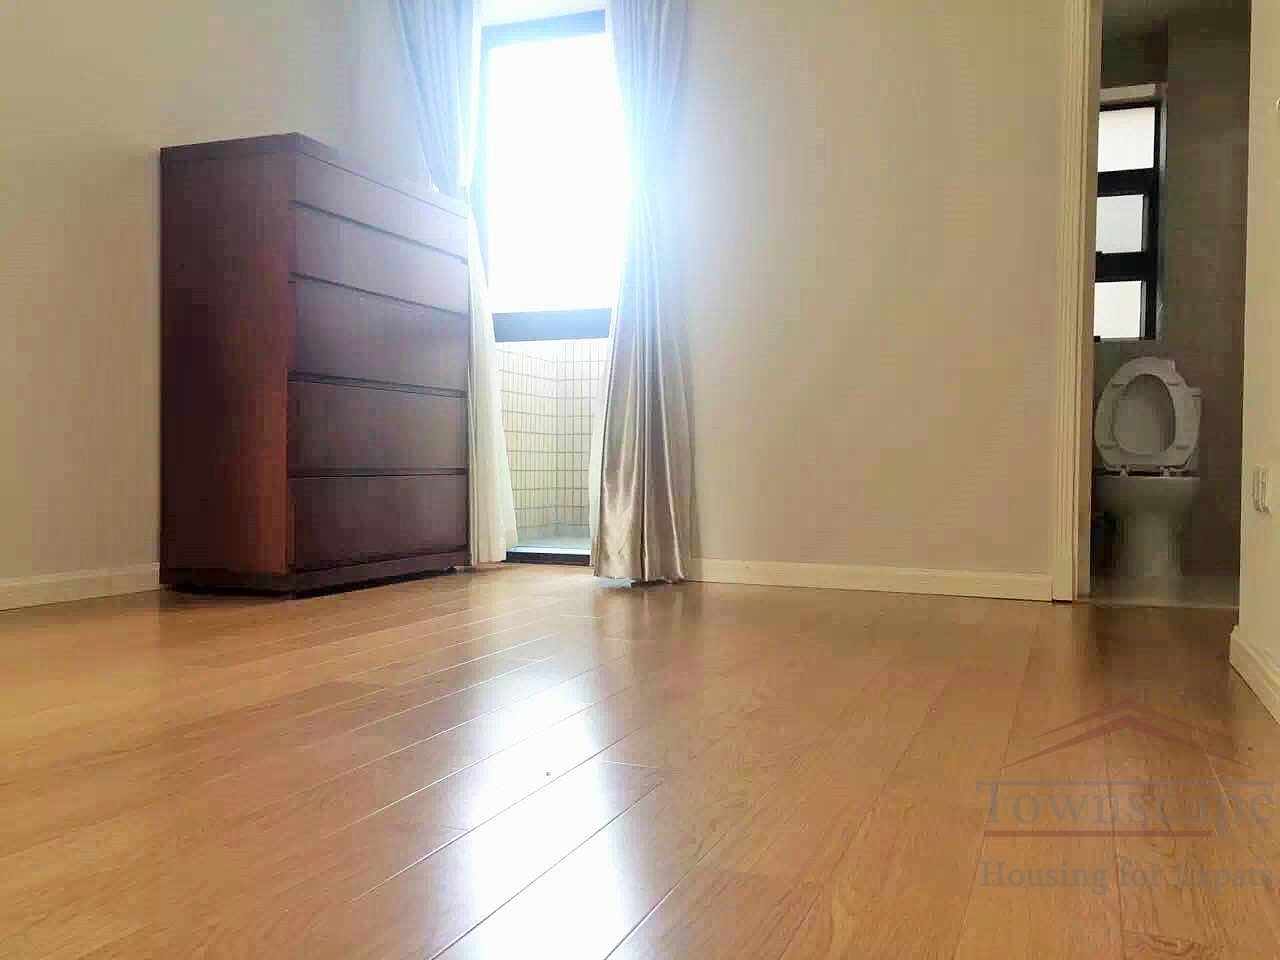  2+1BR Apartment for rent in Ambassy Court, TOP compound